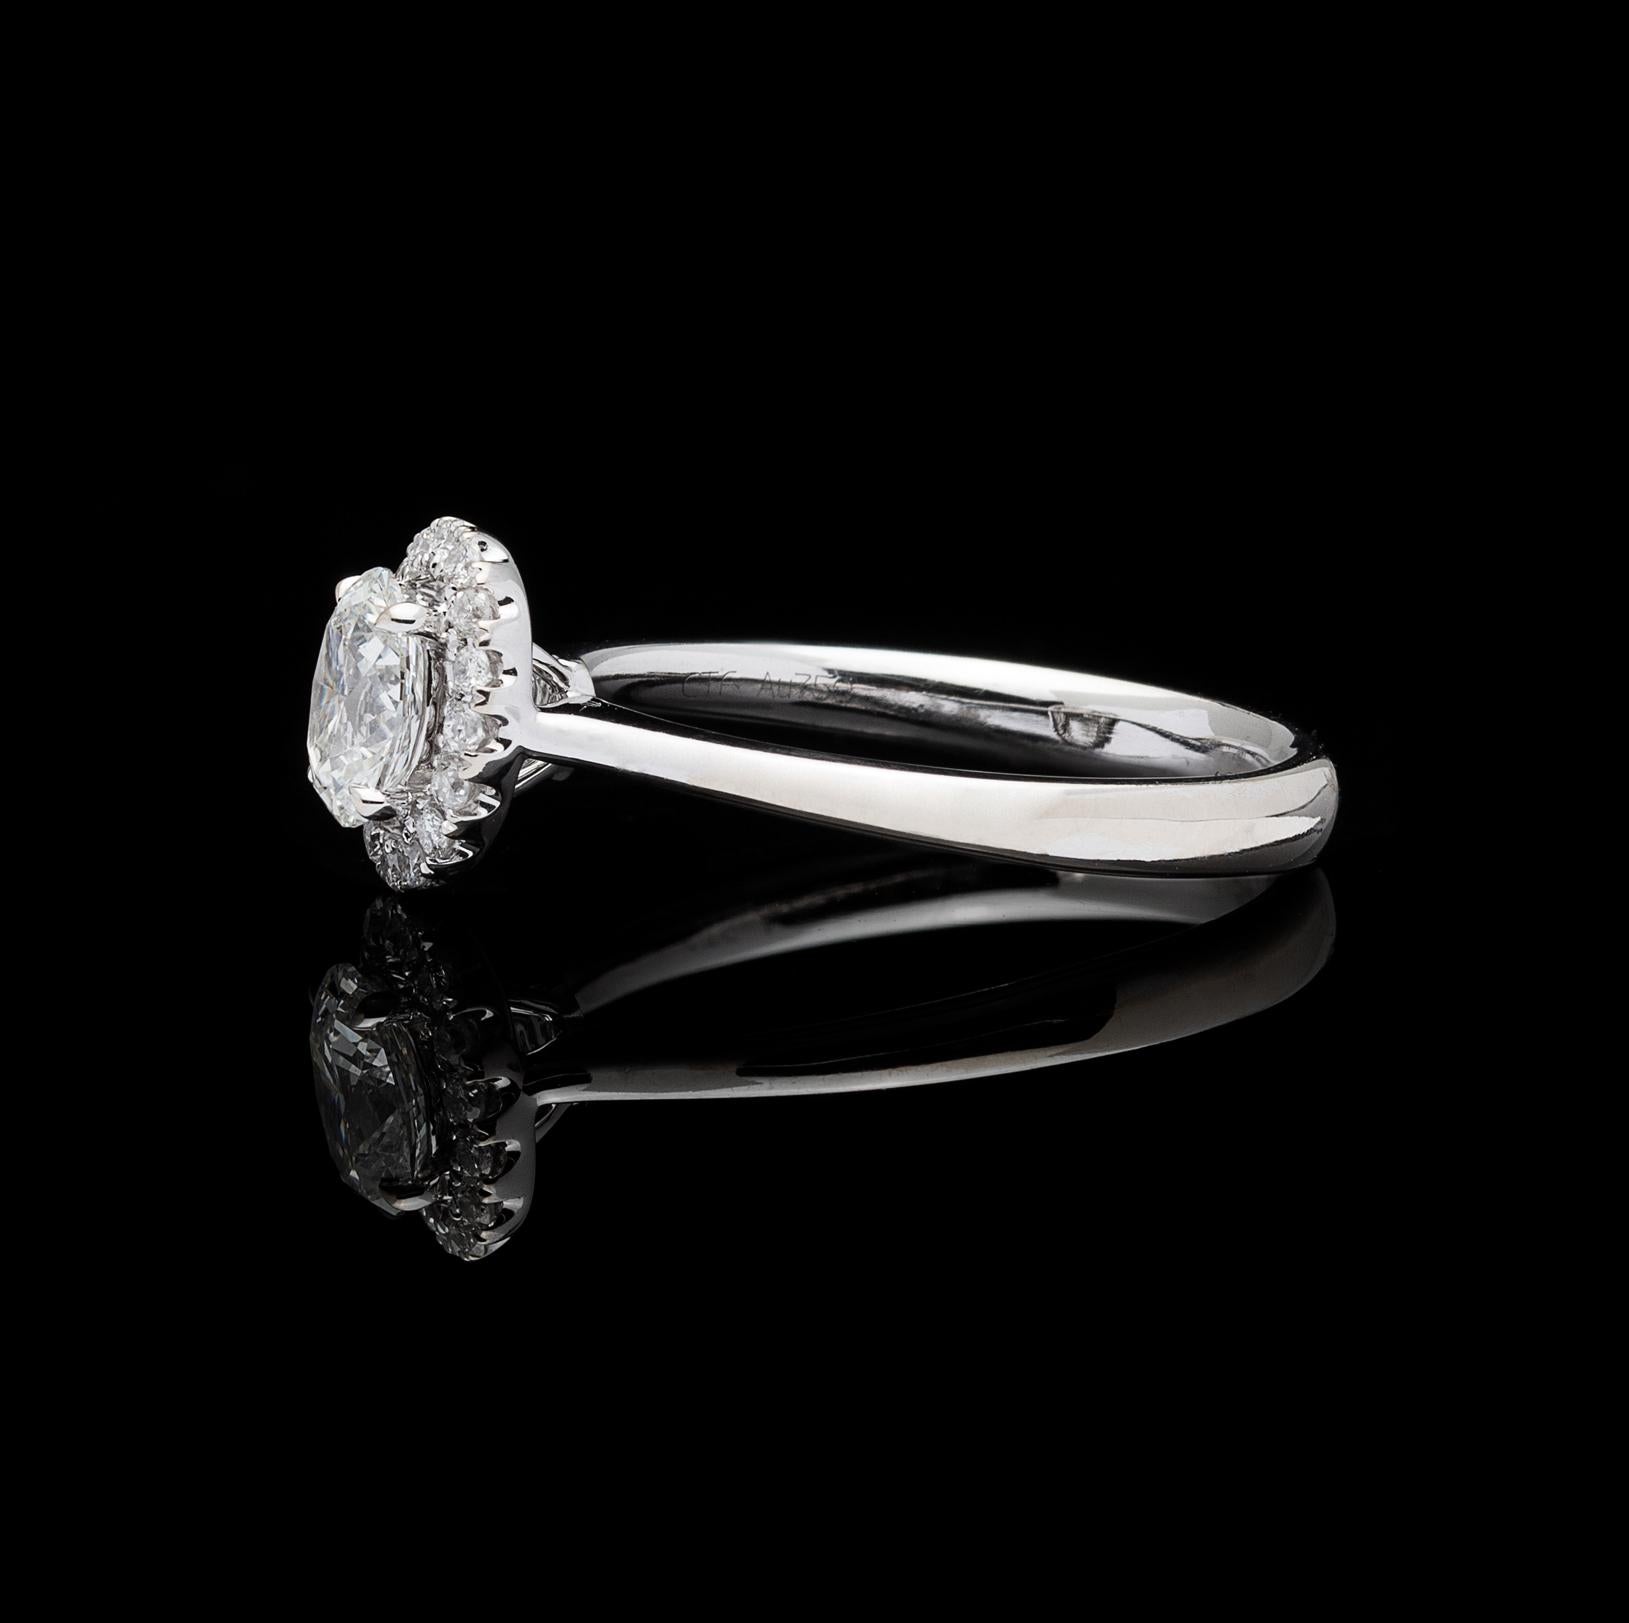 Delicate and feminine, this 18k white gold engagement ring centers a 0.55-carat oval-cut diamond, set within a halo of 16 round brilliant-cut diamonds, for a total diamond weight of approximately 0.71 carats. The ring weighs 2.9 grams, and is